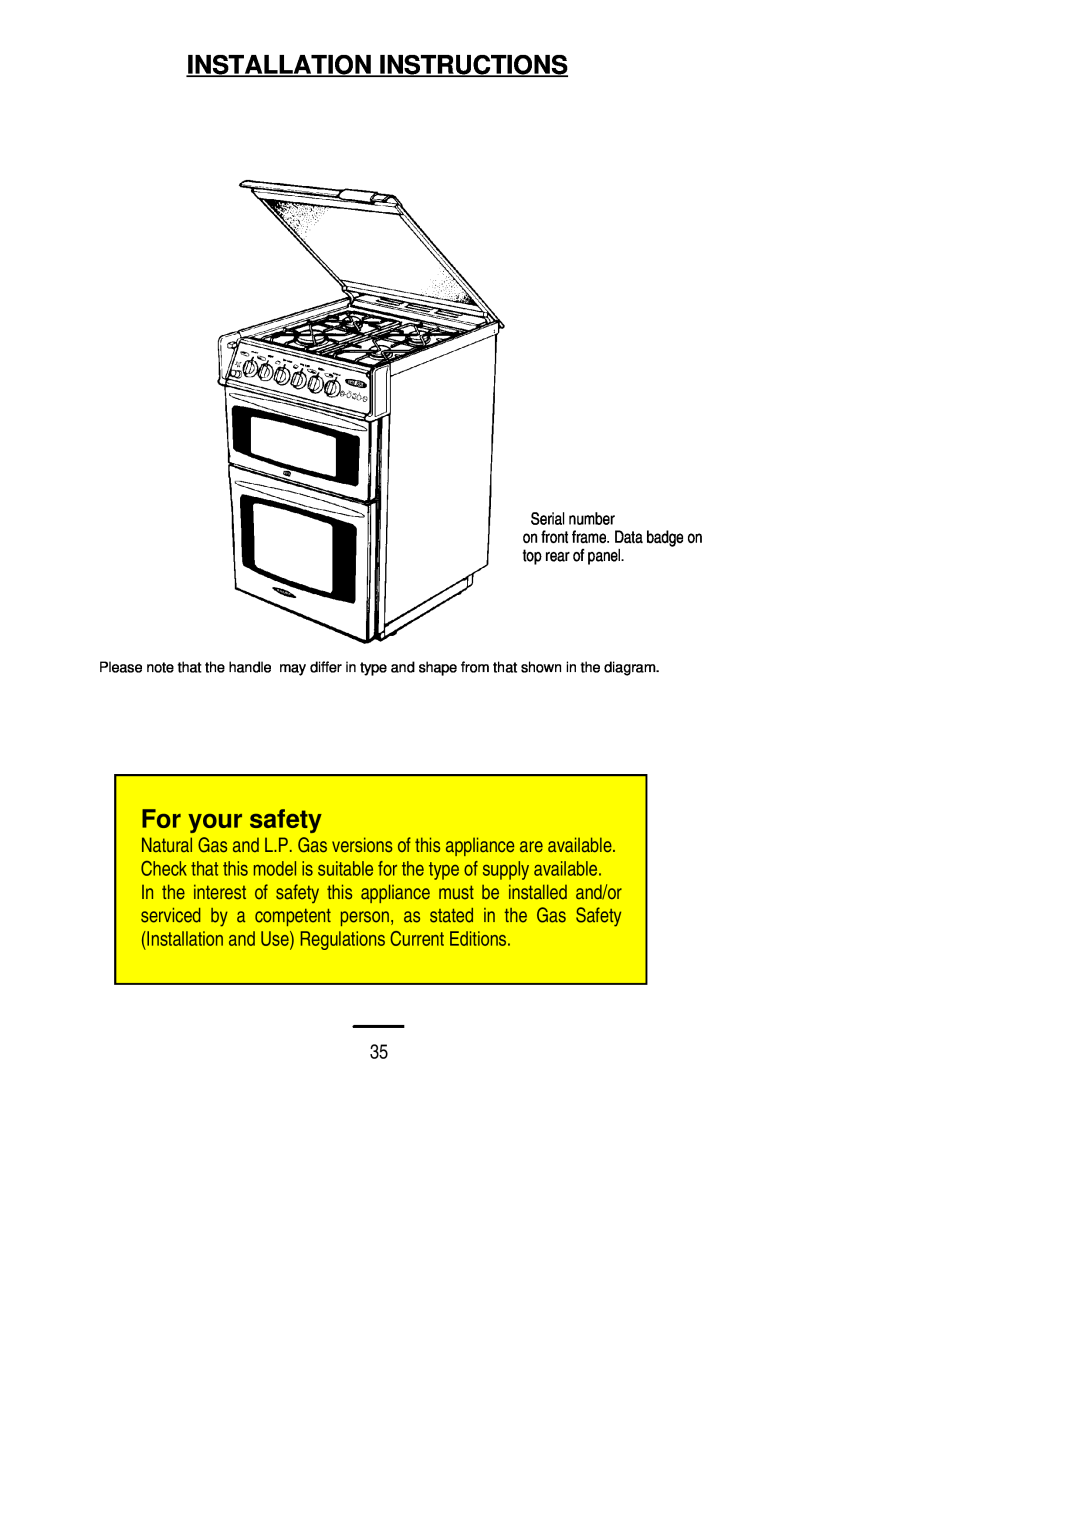 Electrolux SIG 450 installation instructions Installation Instructions, For your safety, Serial number 